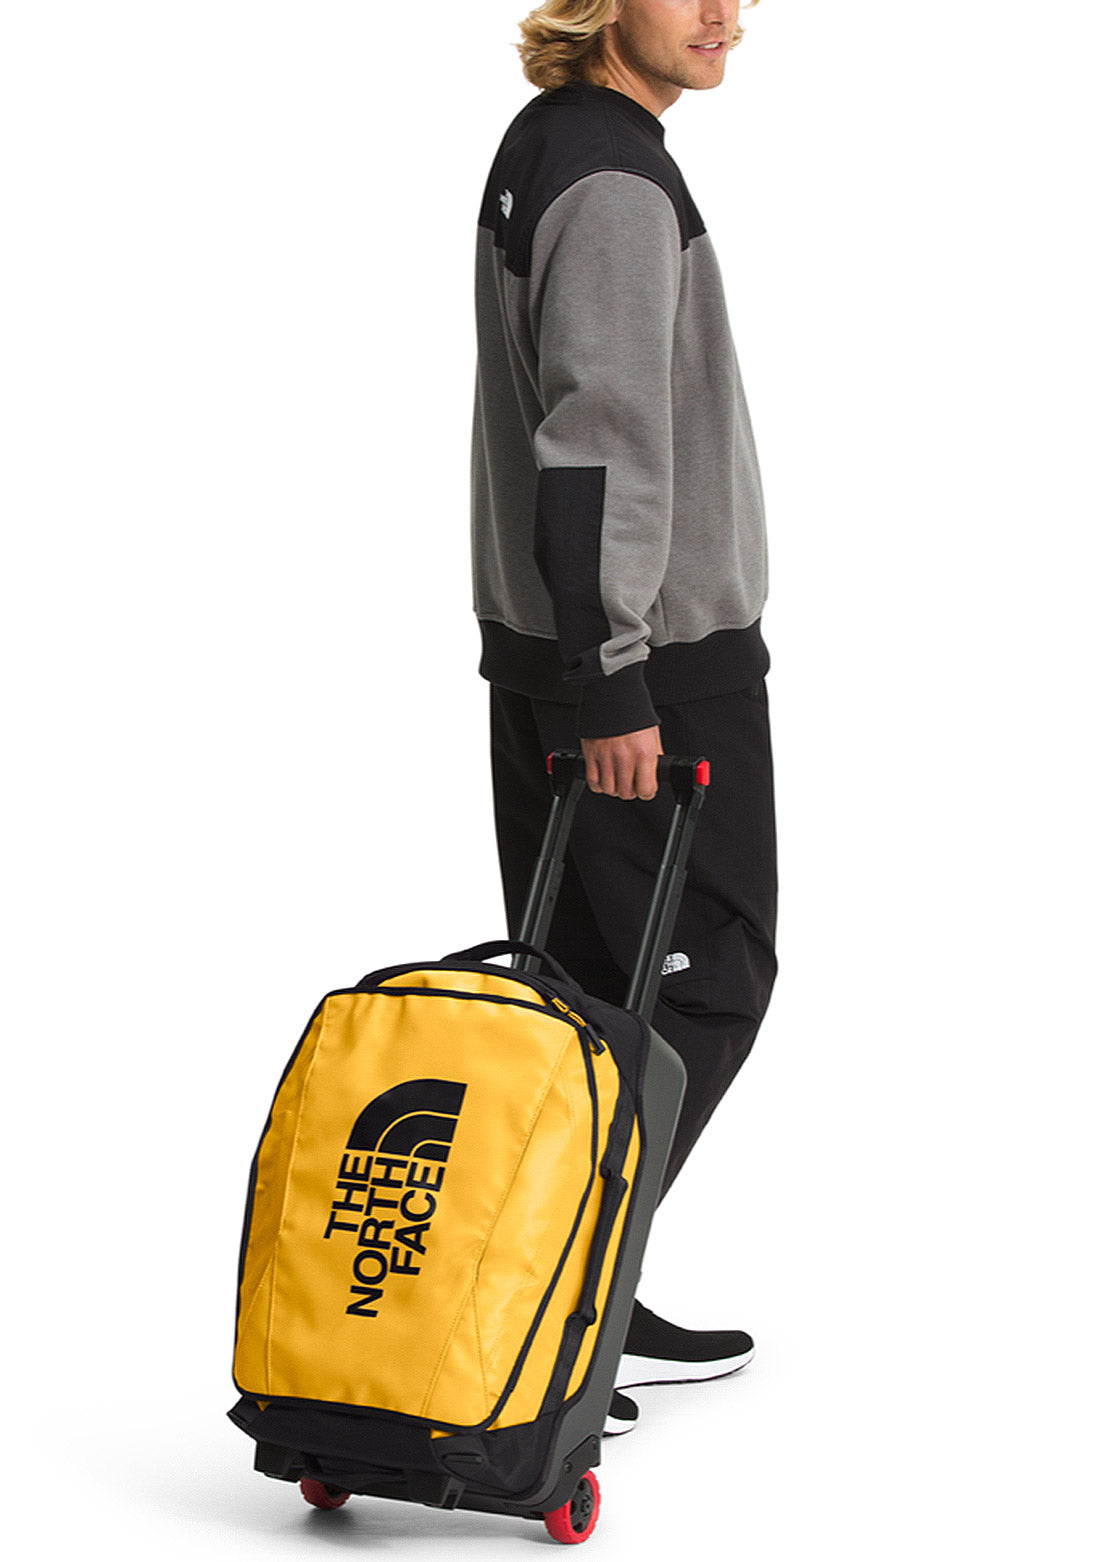 Veeg rijst Wanneer The North Face Rolling Thunder 22" Luggage - PRFO Sports